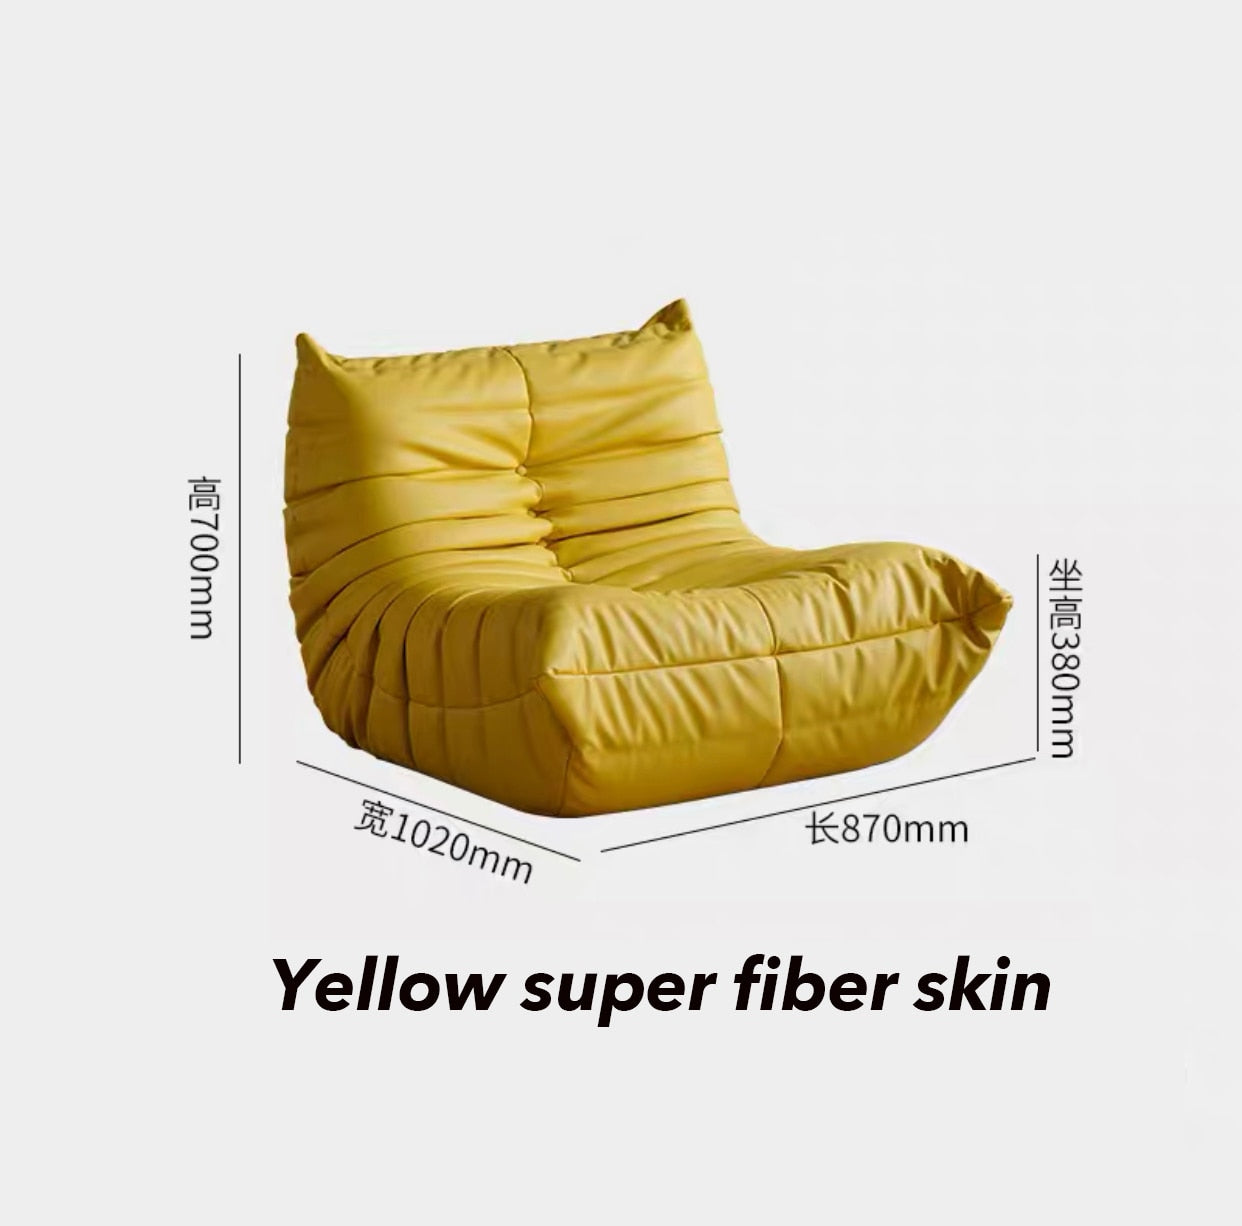 Caterpillar Single Sofa Lazy Couch Tatami Living Room Bedroom Lovely Leisure Single Chair Reading Chair Balcony Rocking Chair